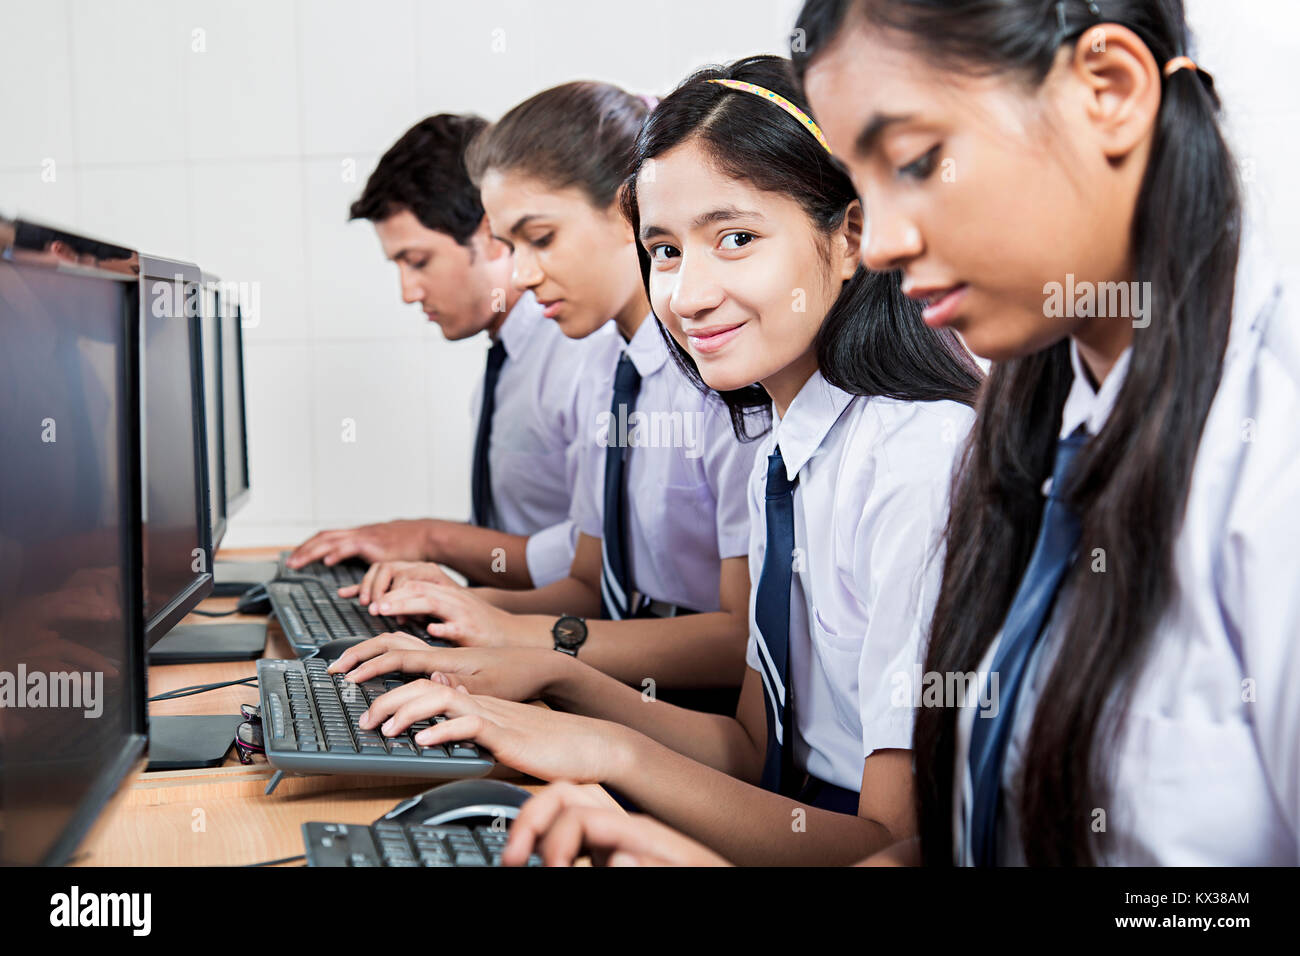 Indian School Students Girl Using Computer Studying Education Learning Class Stock Photo